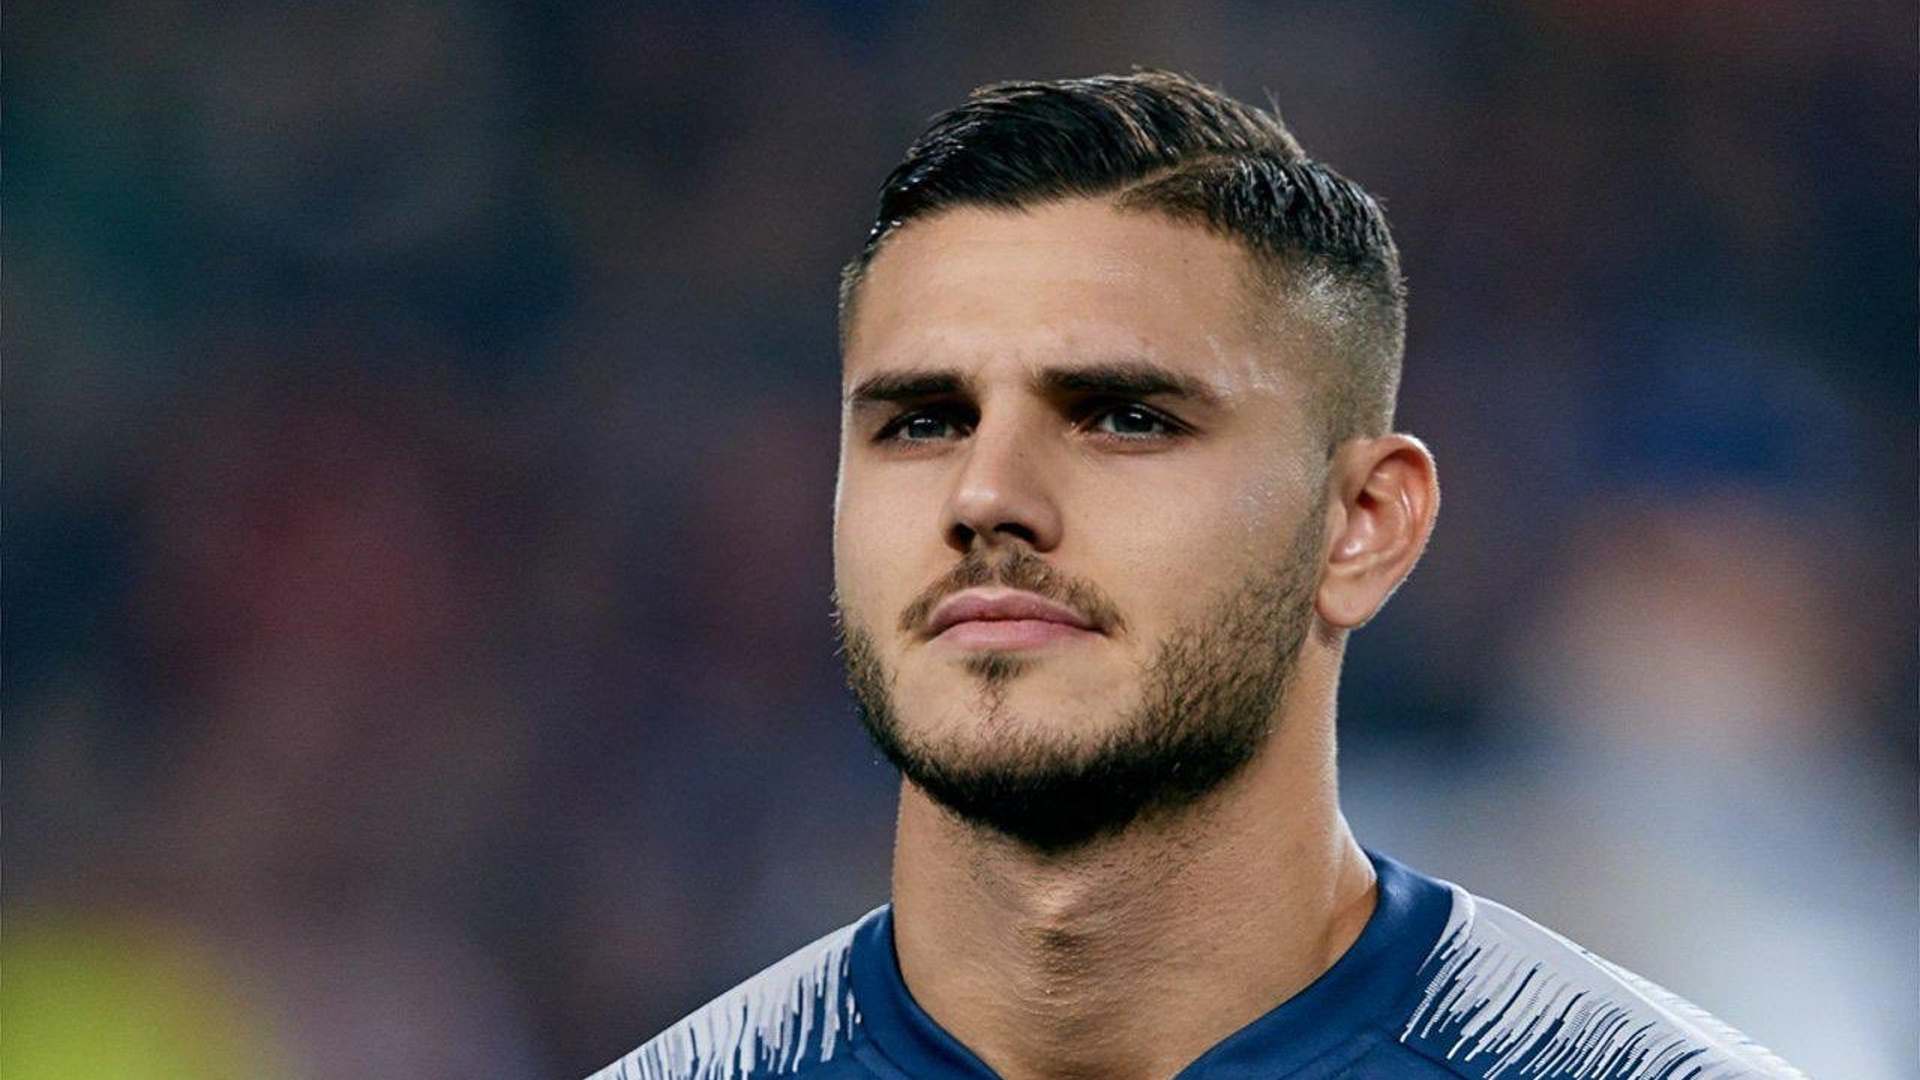 What is Mauro Icardi's net worth, salary, transfer value and endorsements?